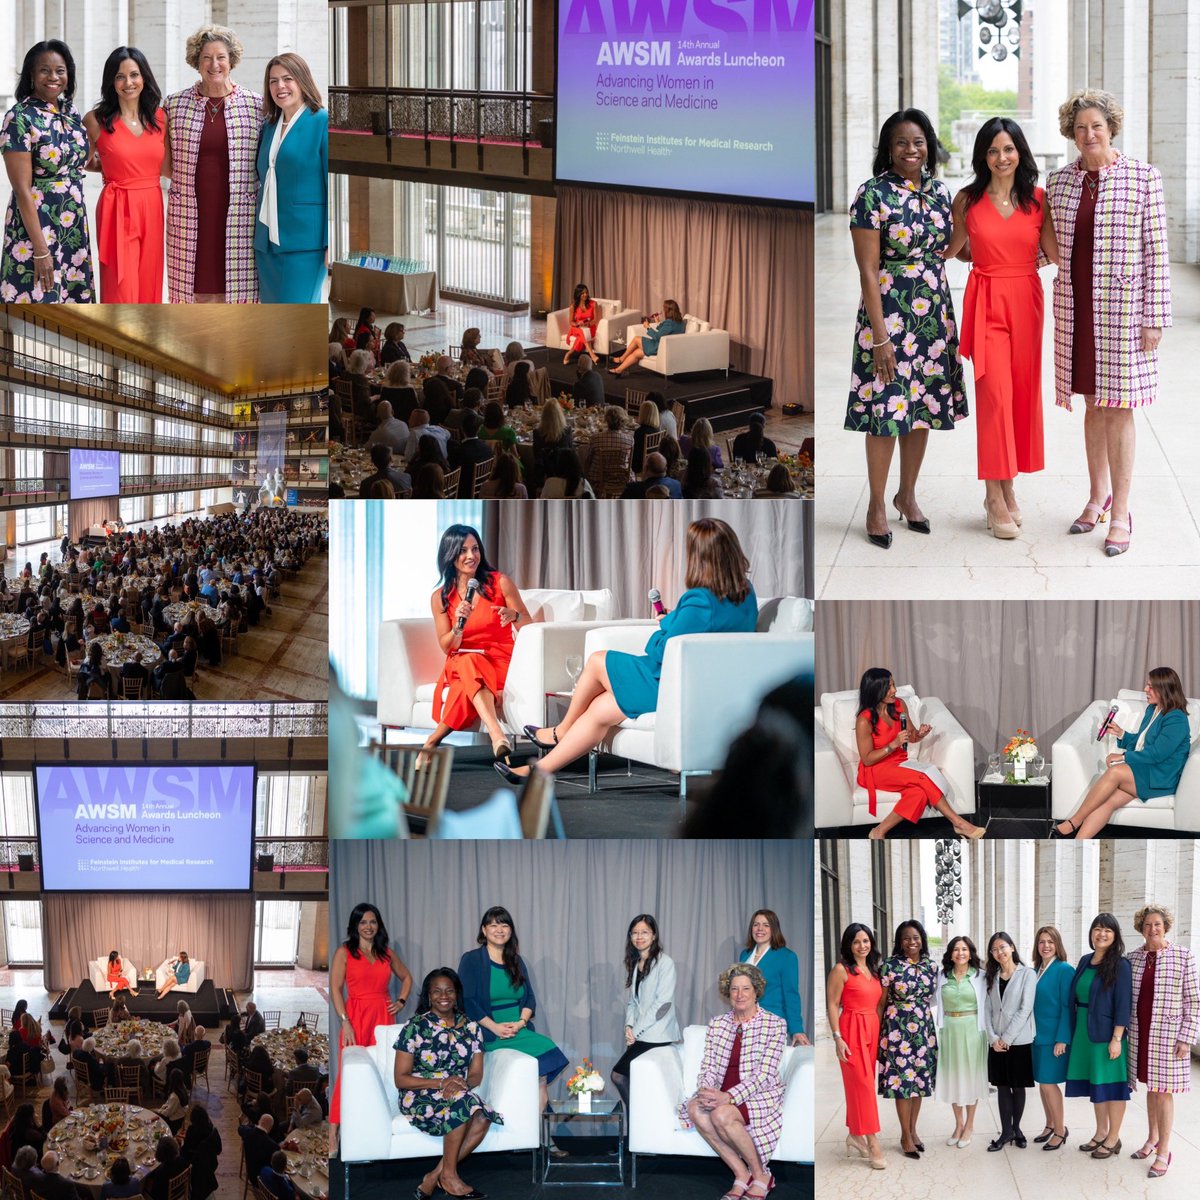 Yesterday’s Advancing Women in Science and Medicine (AWSM) Awards luncheon at Lincoln Center - where I had the pleasure of moderating a chat on breakthrough discoveries in women’s behavioral health with Dr. Kristina Deligiannidis - a trailblazer in reproductive psychiatry a…